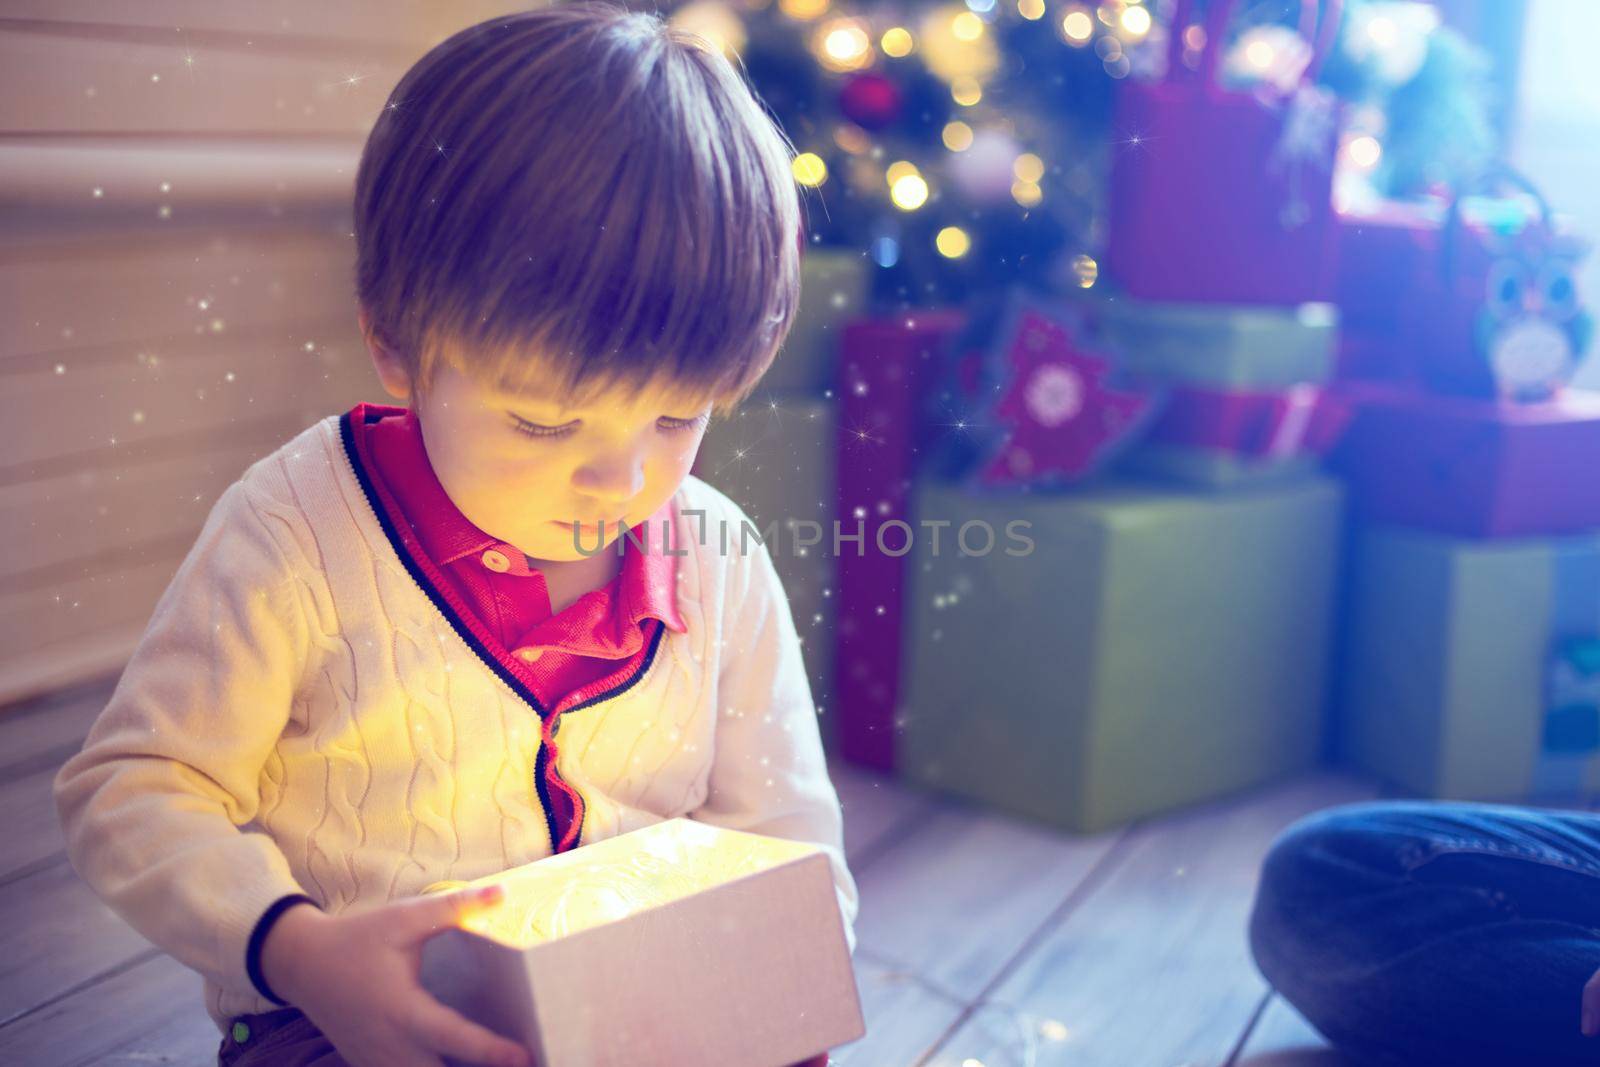 Surprised child opening and looking inside a magic gift over Christmas tree.